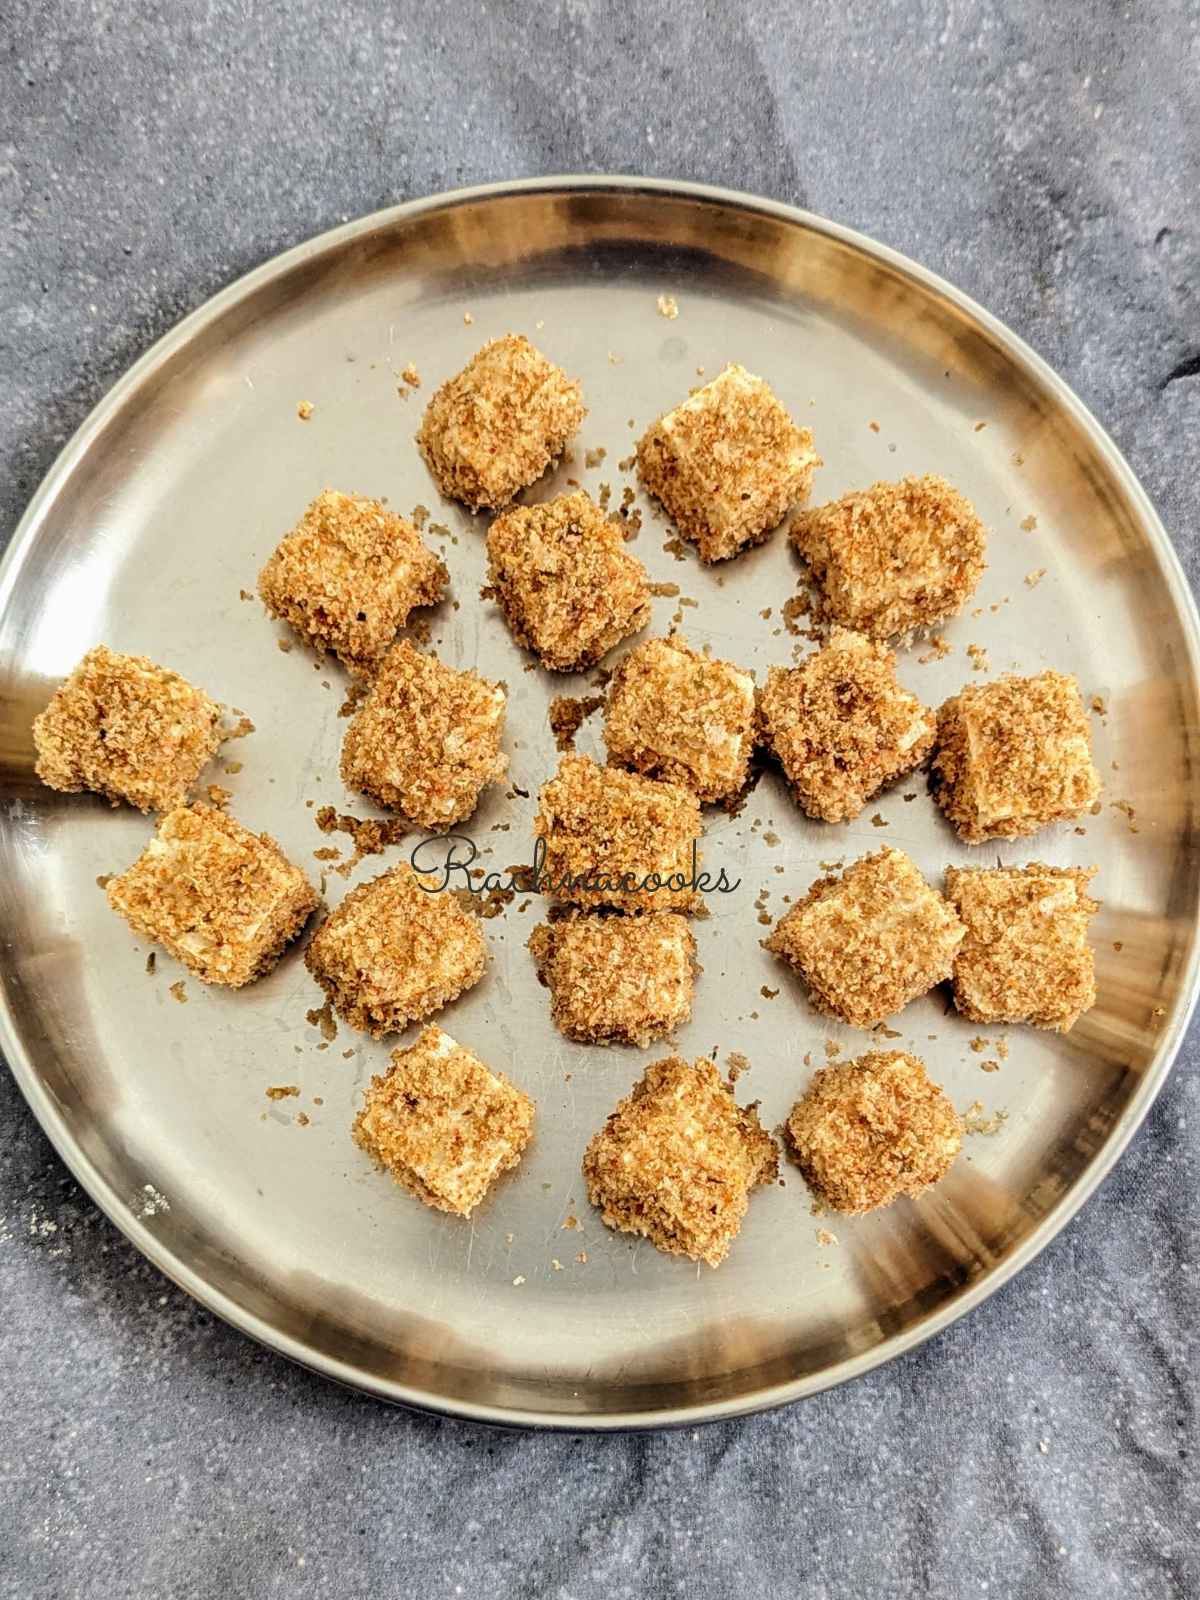 Tofu bites after breading in a shallow plate.